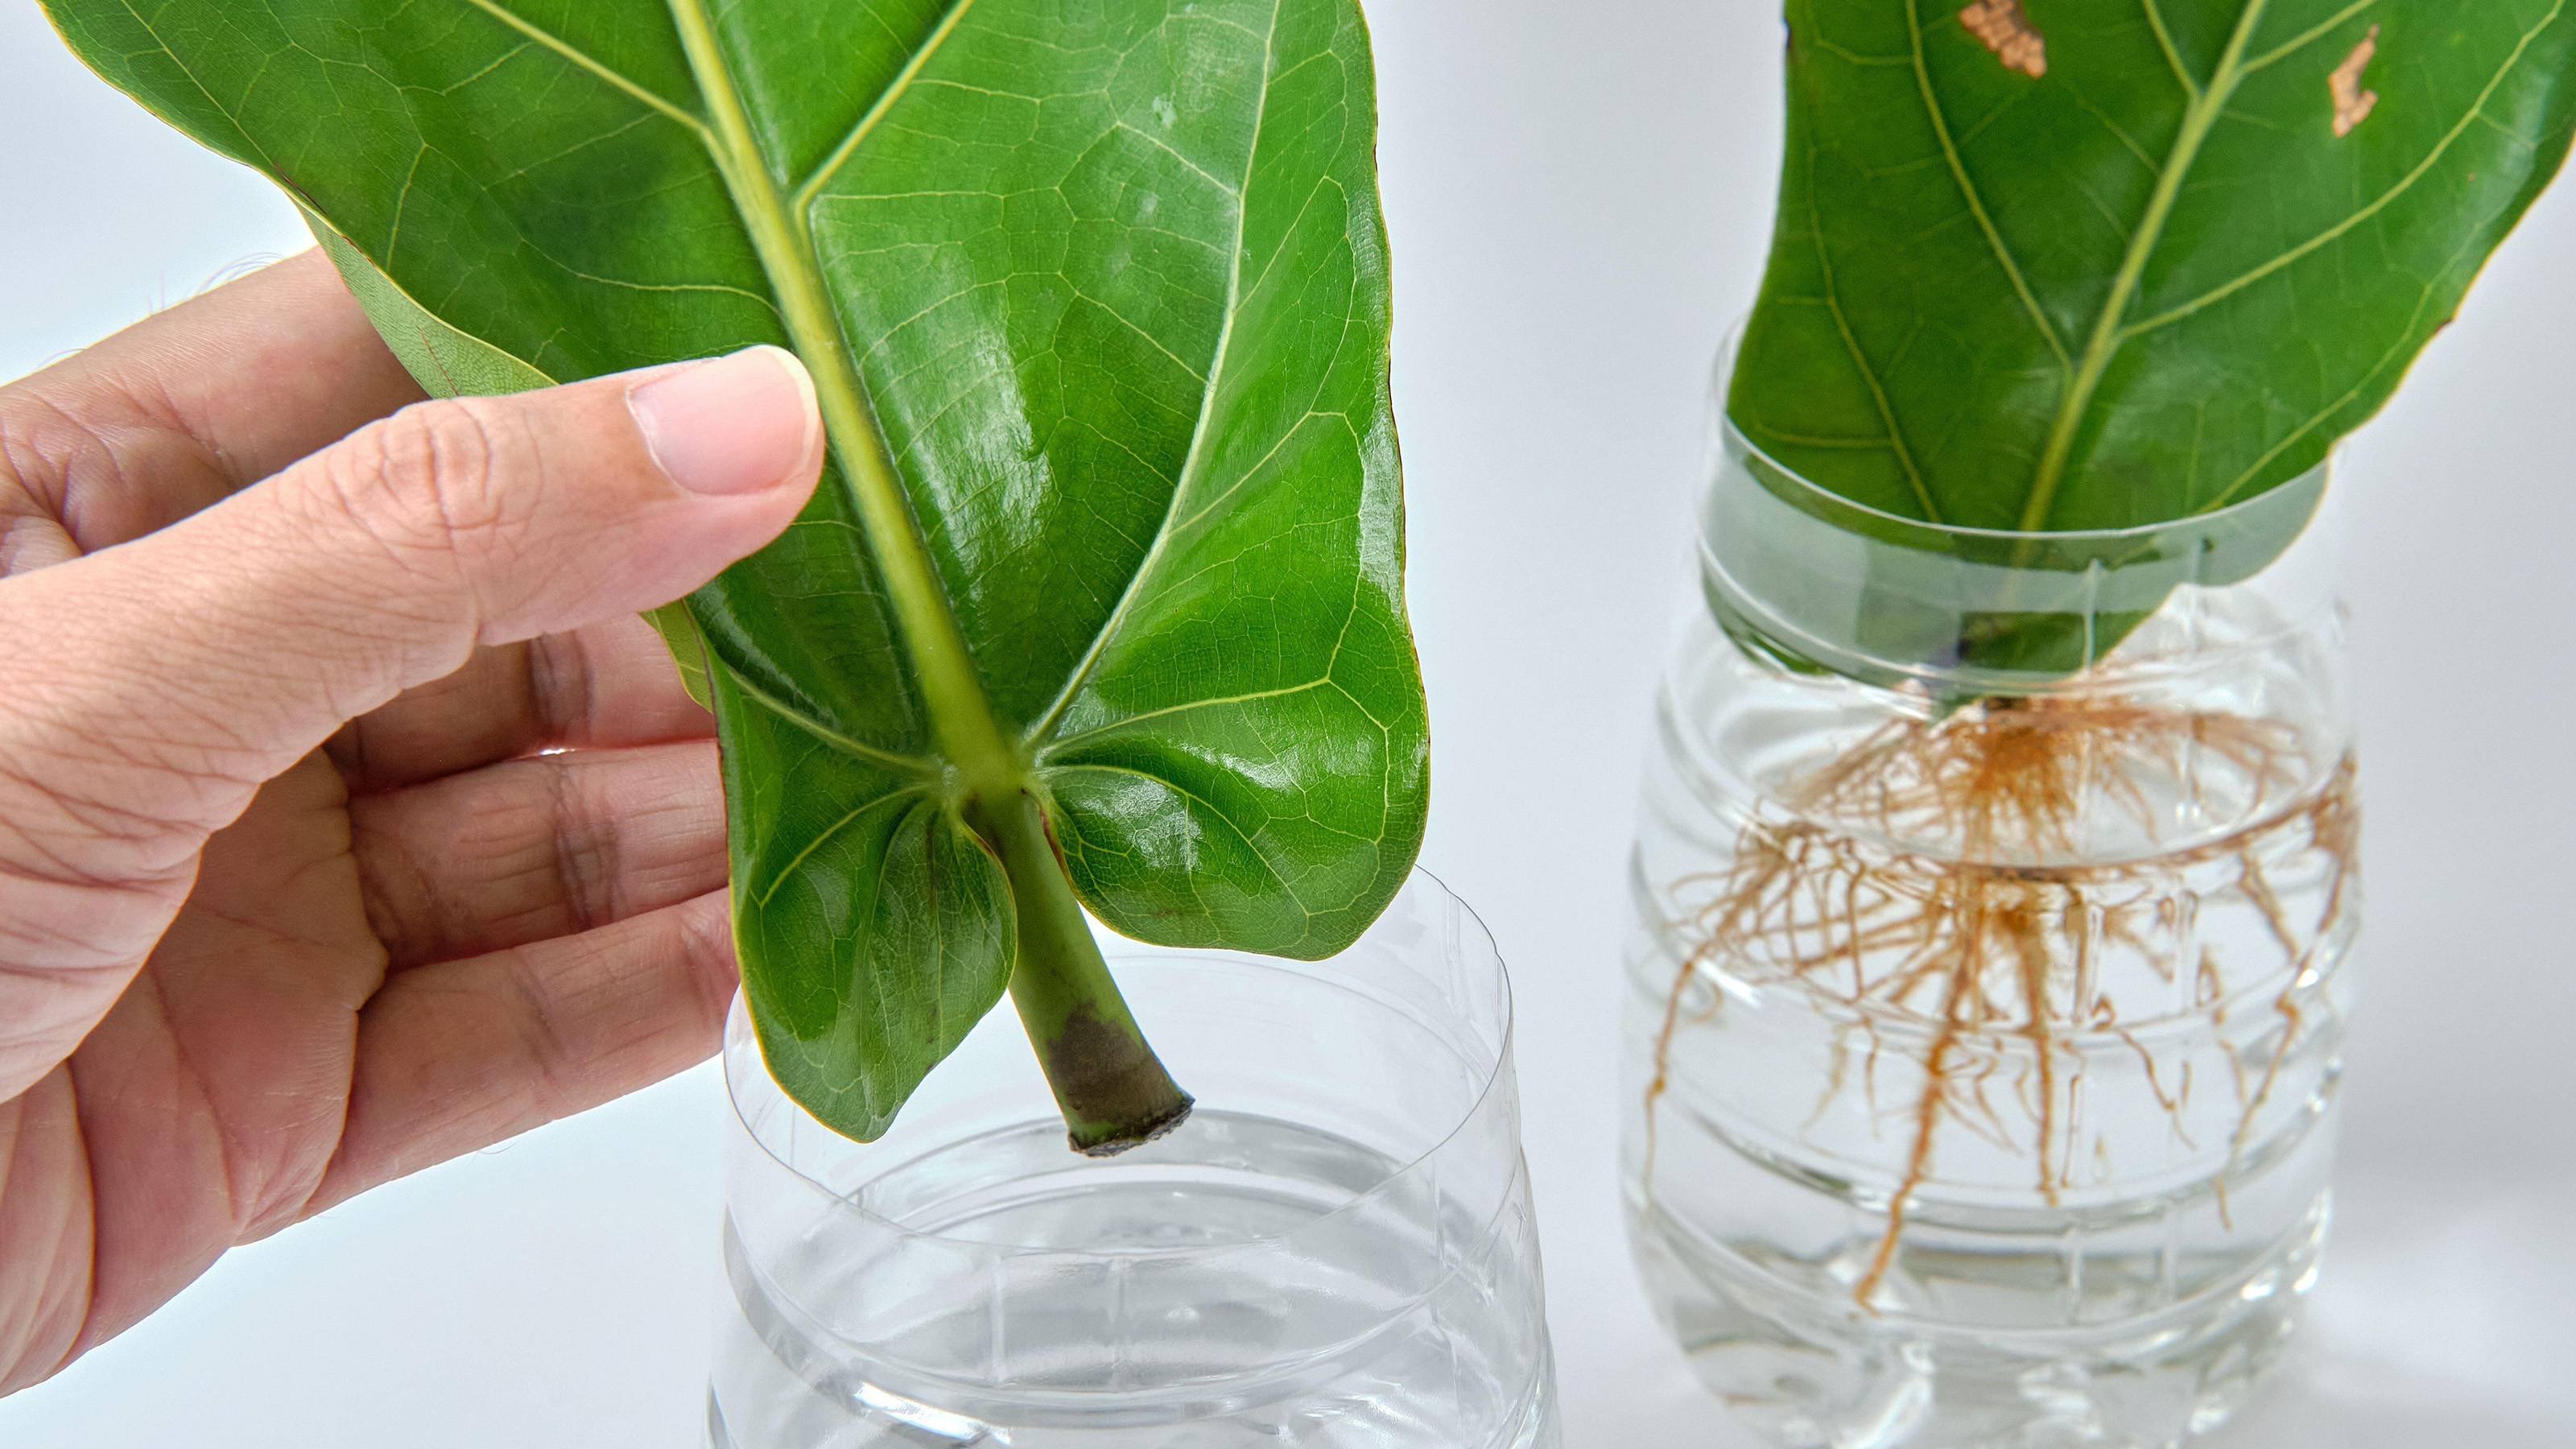 How to Propagate Fiddle-Leaf Figs